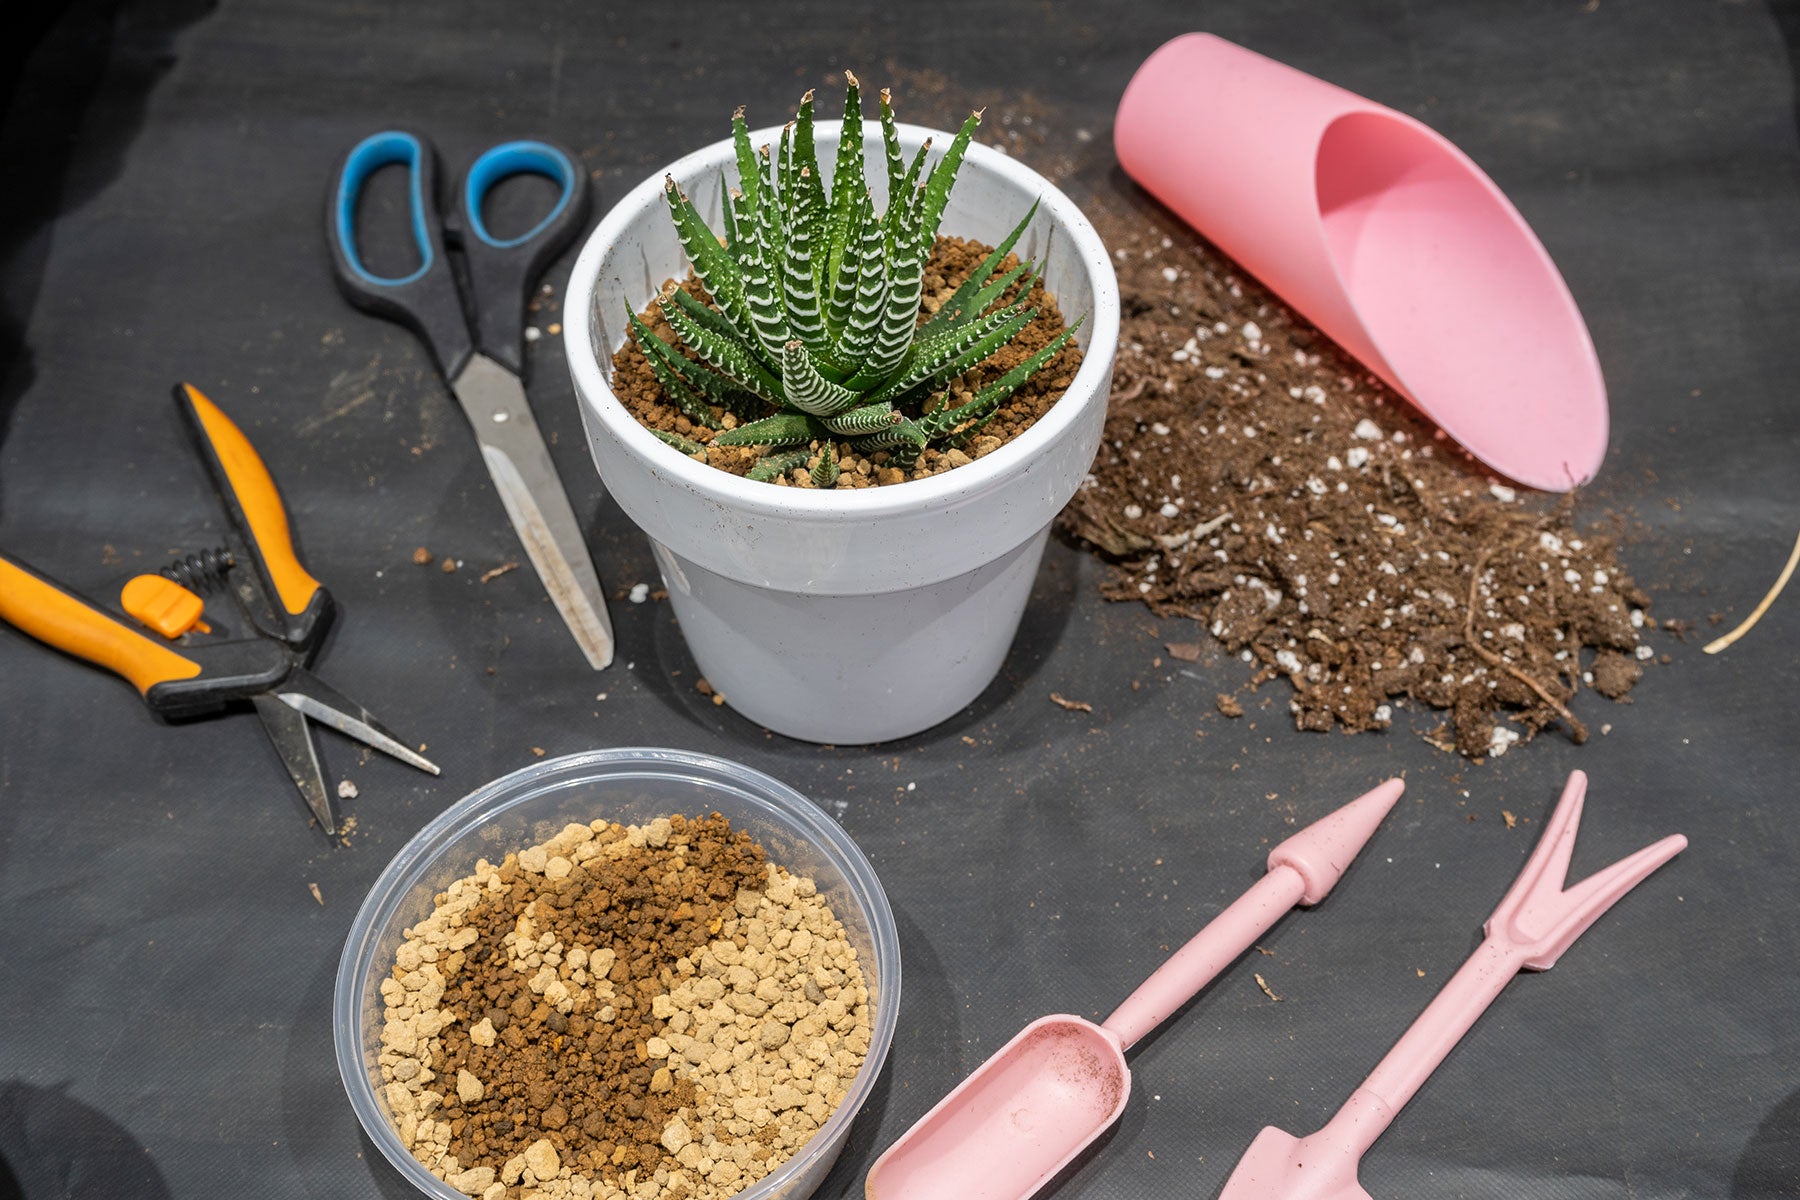 Succulent 101: How to Repot Your Succulent Plant | Plant Care and Tips - JOMO Studio